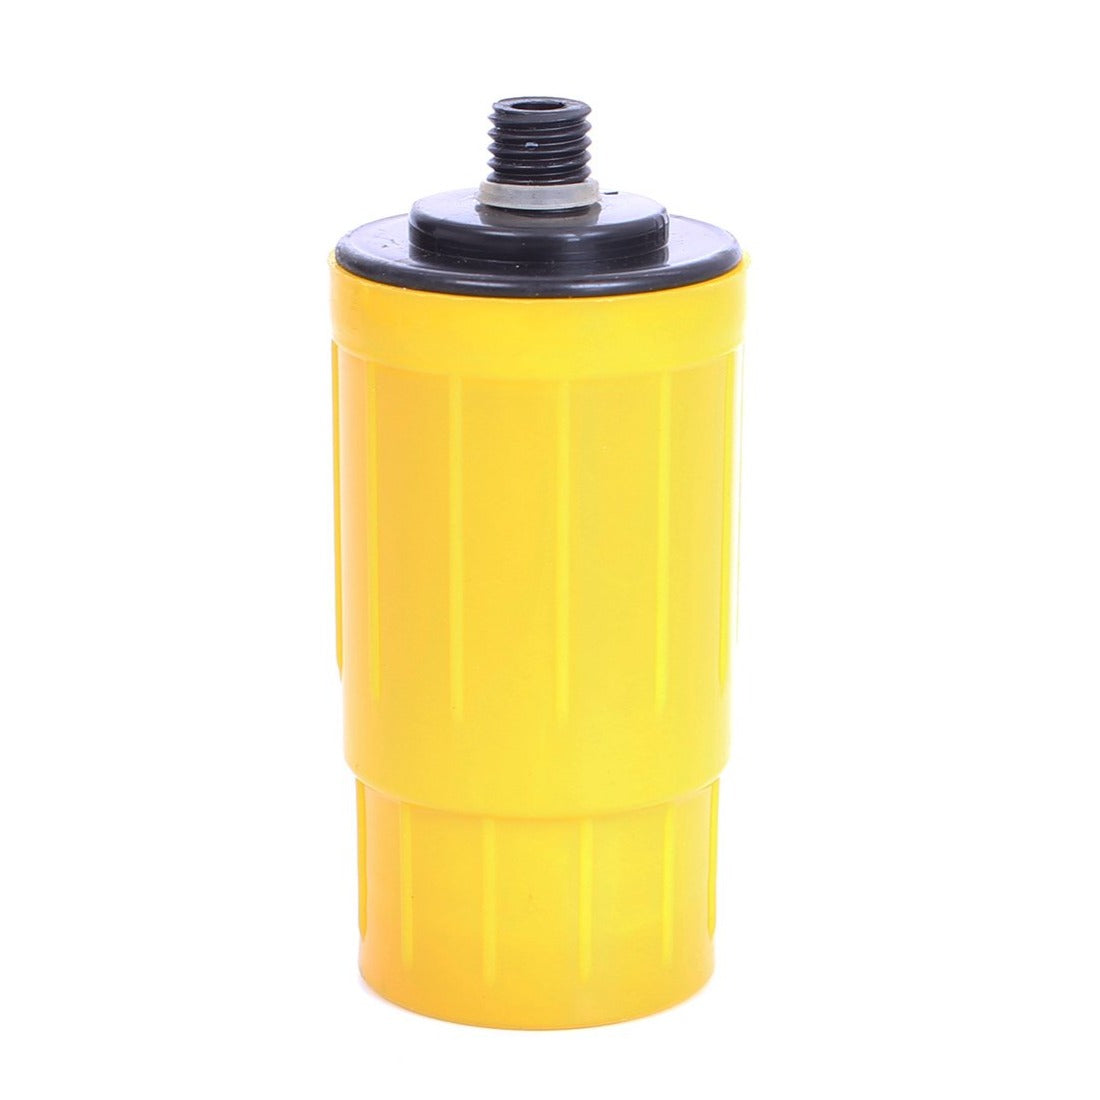 28oz RAD (Radiological) Replacement Filter